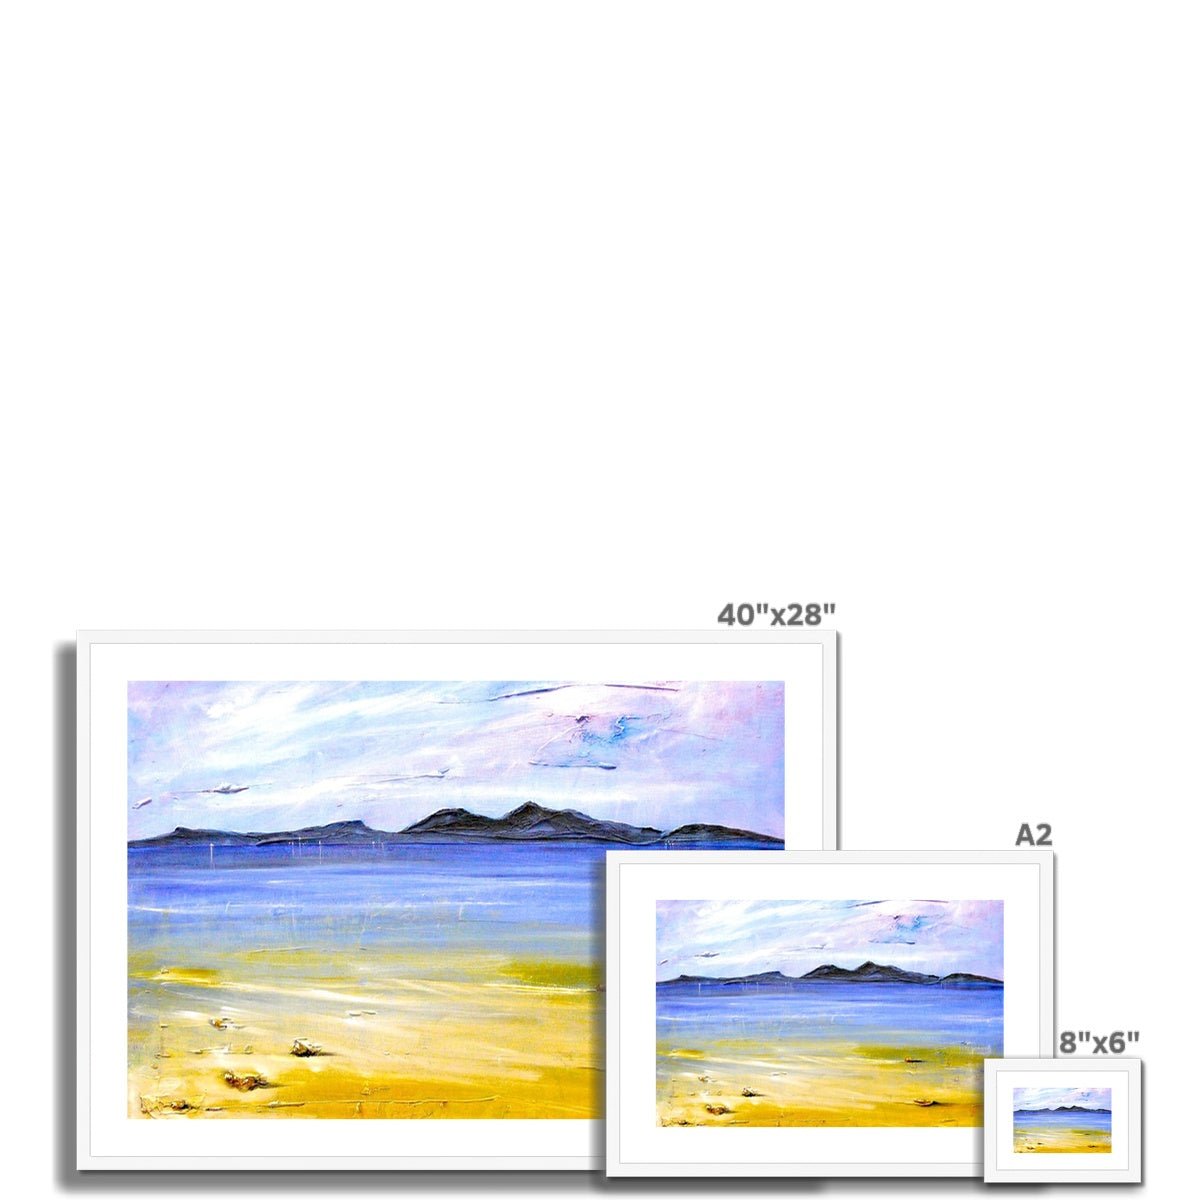 Camusdarach Beach Arisaig Painting | Framed & Mounted Prints From Scotland-Framed & Mounted Prints-Scottish Highlands & Lowlands Art Gallery-Paintings, Prints, Homeware, Art Gifts From Scotland By Scottish Artist Kevin Hunter